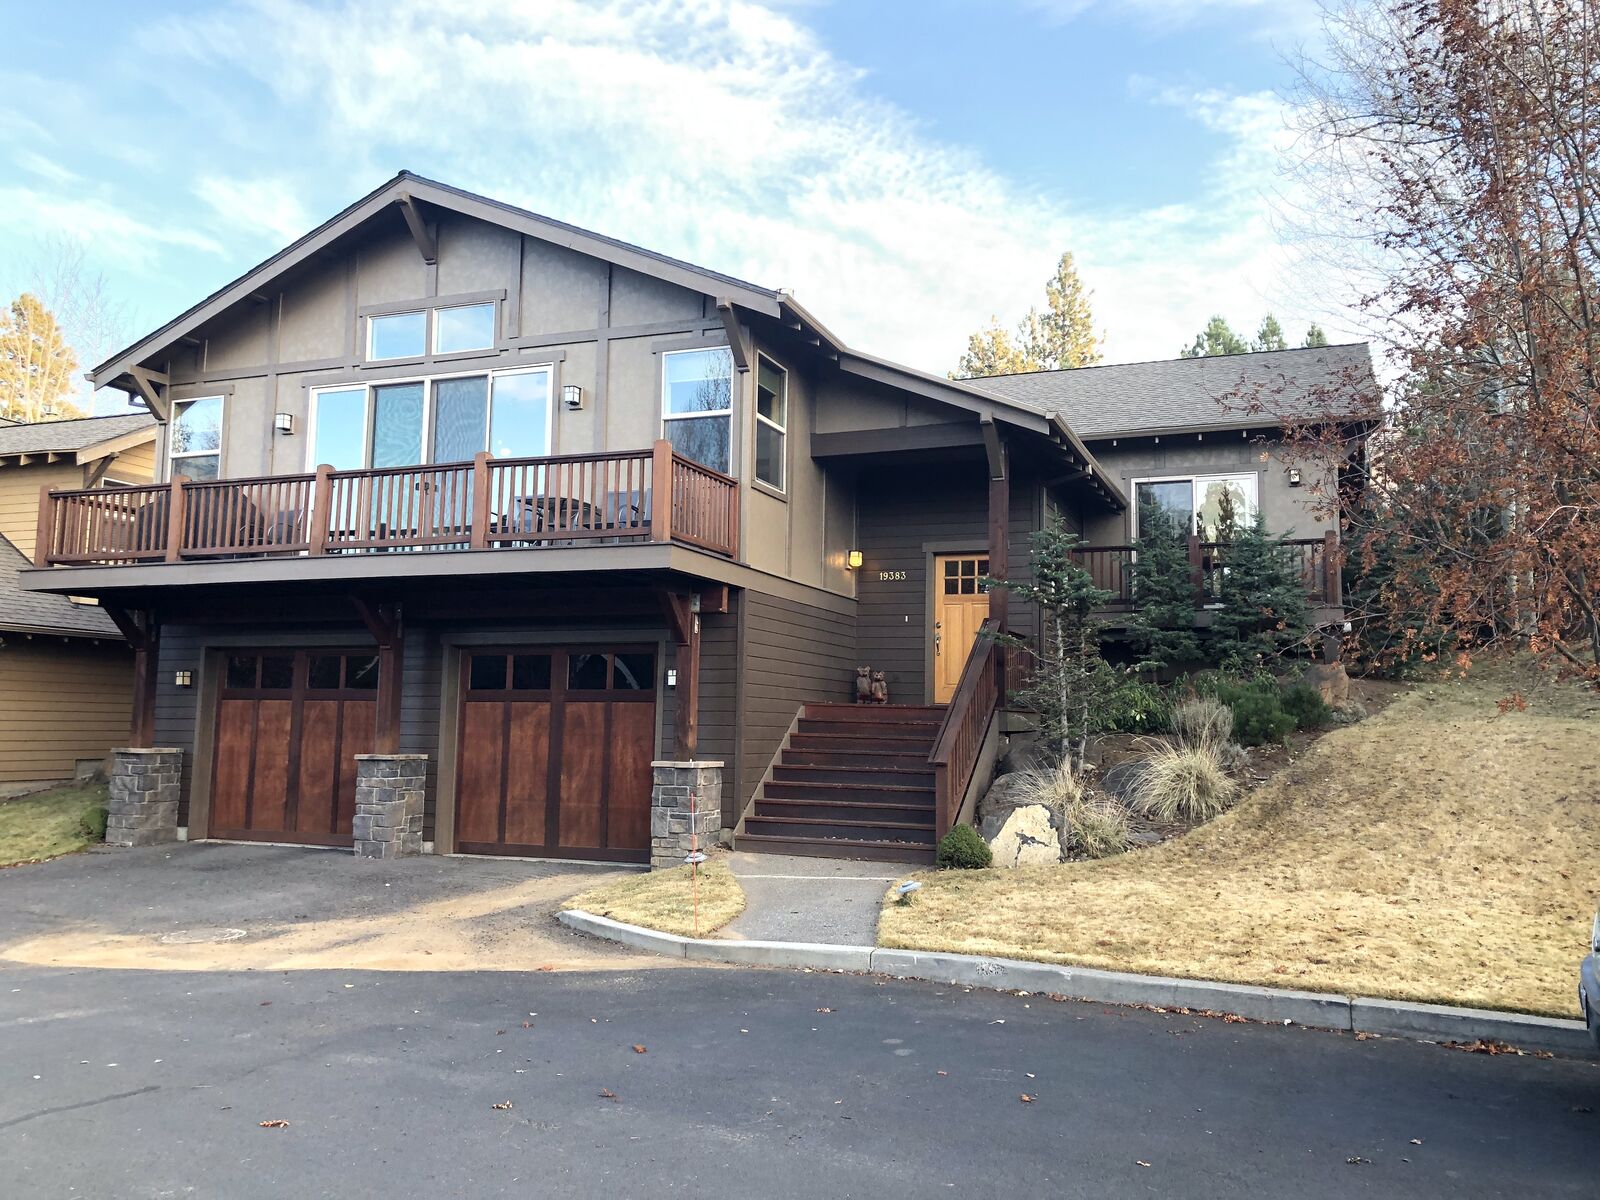 Our 3 bed vacation homes in Bend